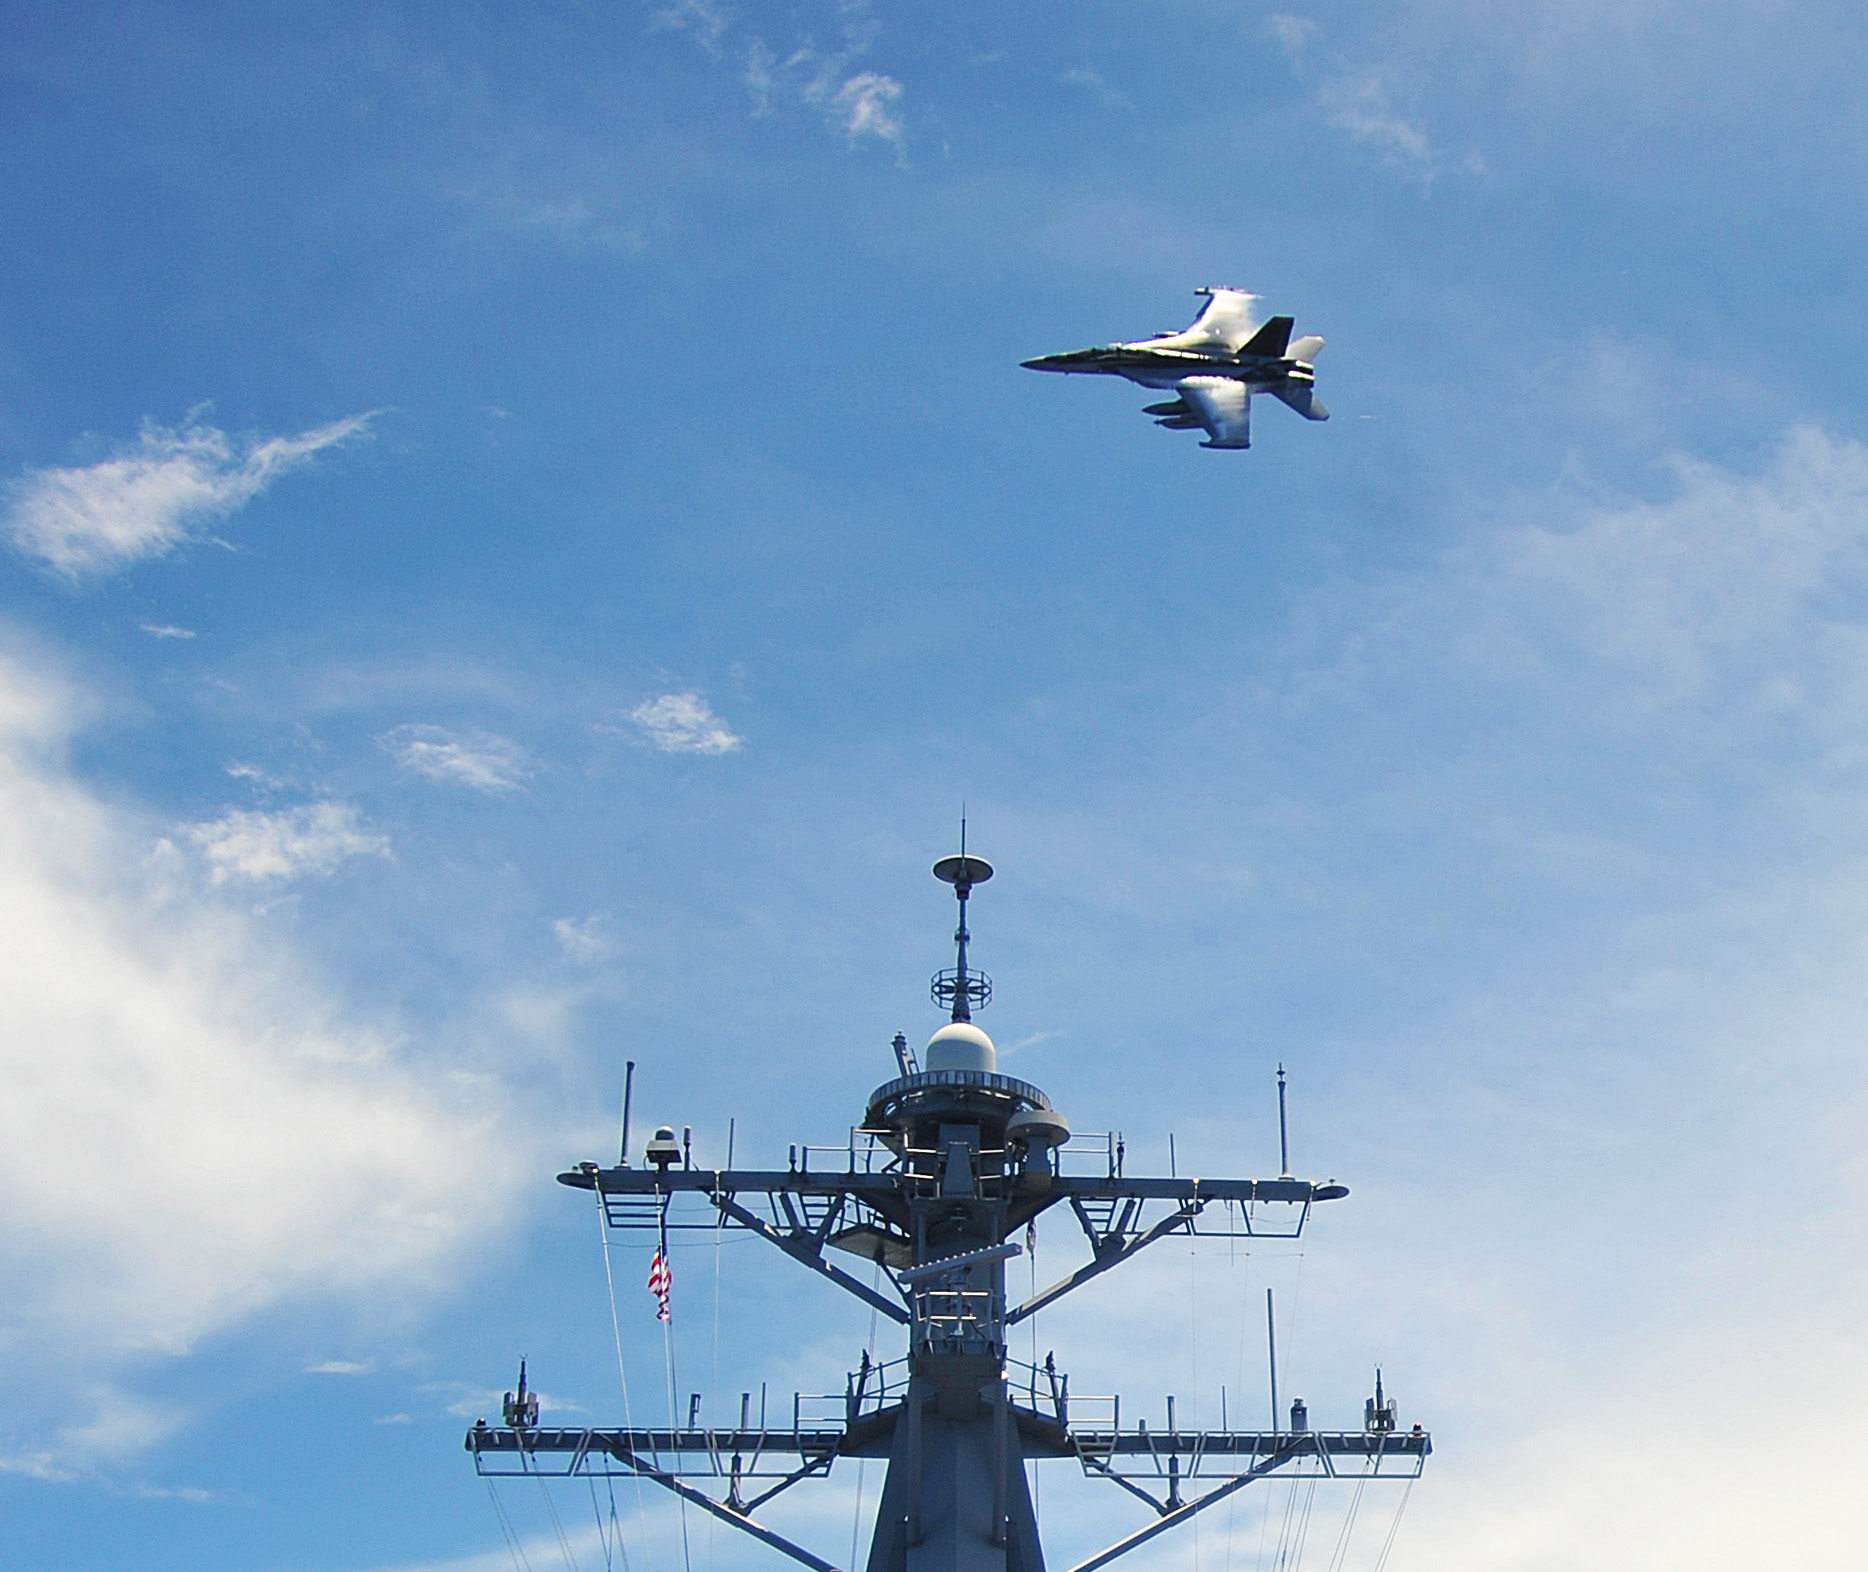 EA-18G Growler assigned to the Electronic Attack Squadron 141 (VAQ) flies over the Arleigh Burke-class guided-missile destroyer USS McCampbell (DDG-85) on Sept. 3, 2012 